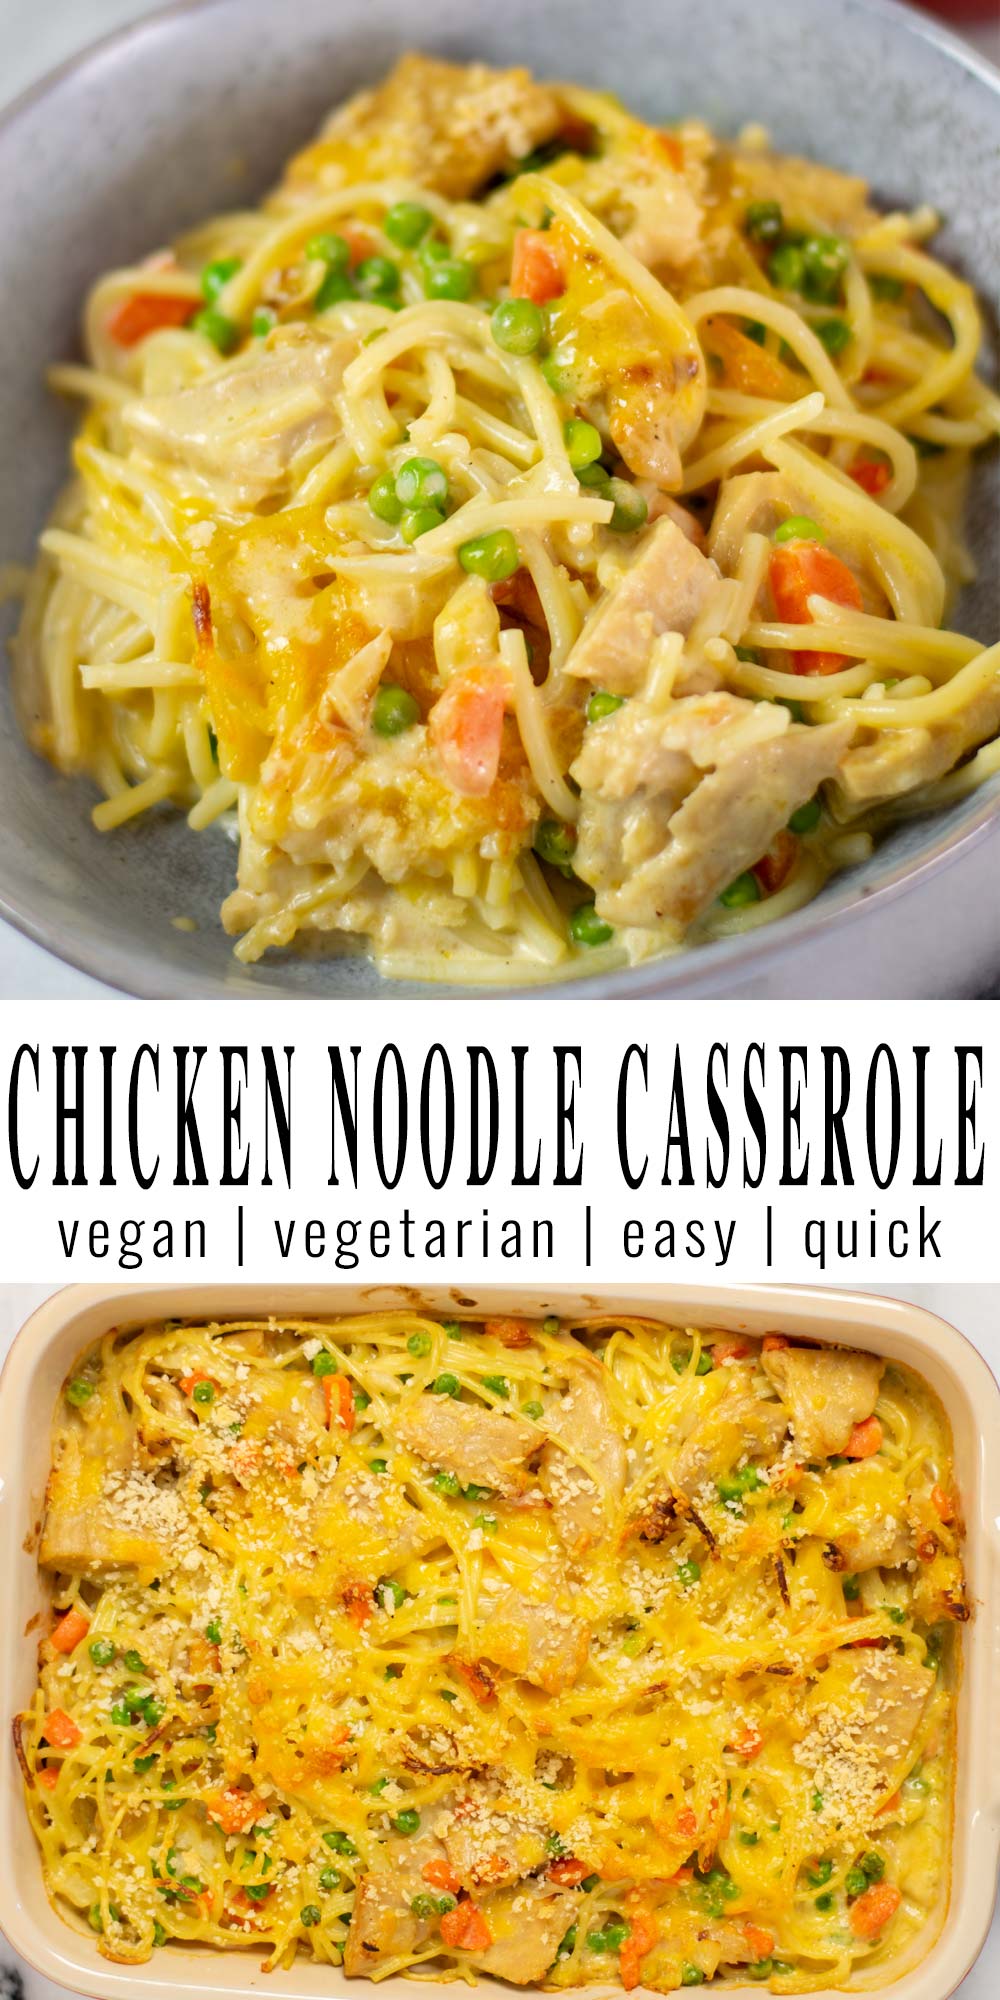 Collage of two pictures of the Chicken Noodle Casserole with recipe title text.